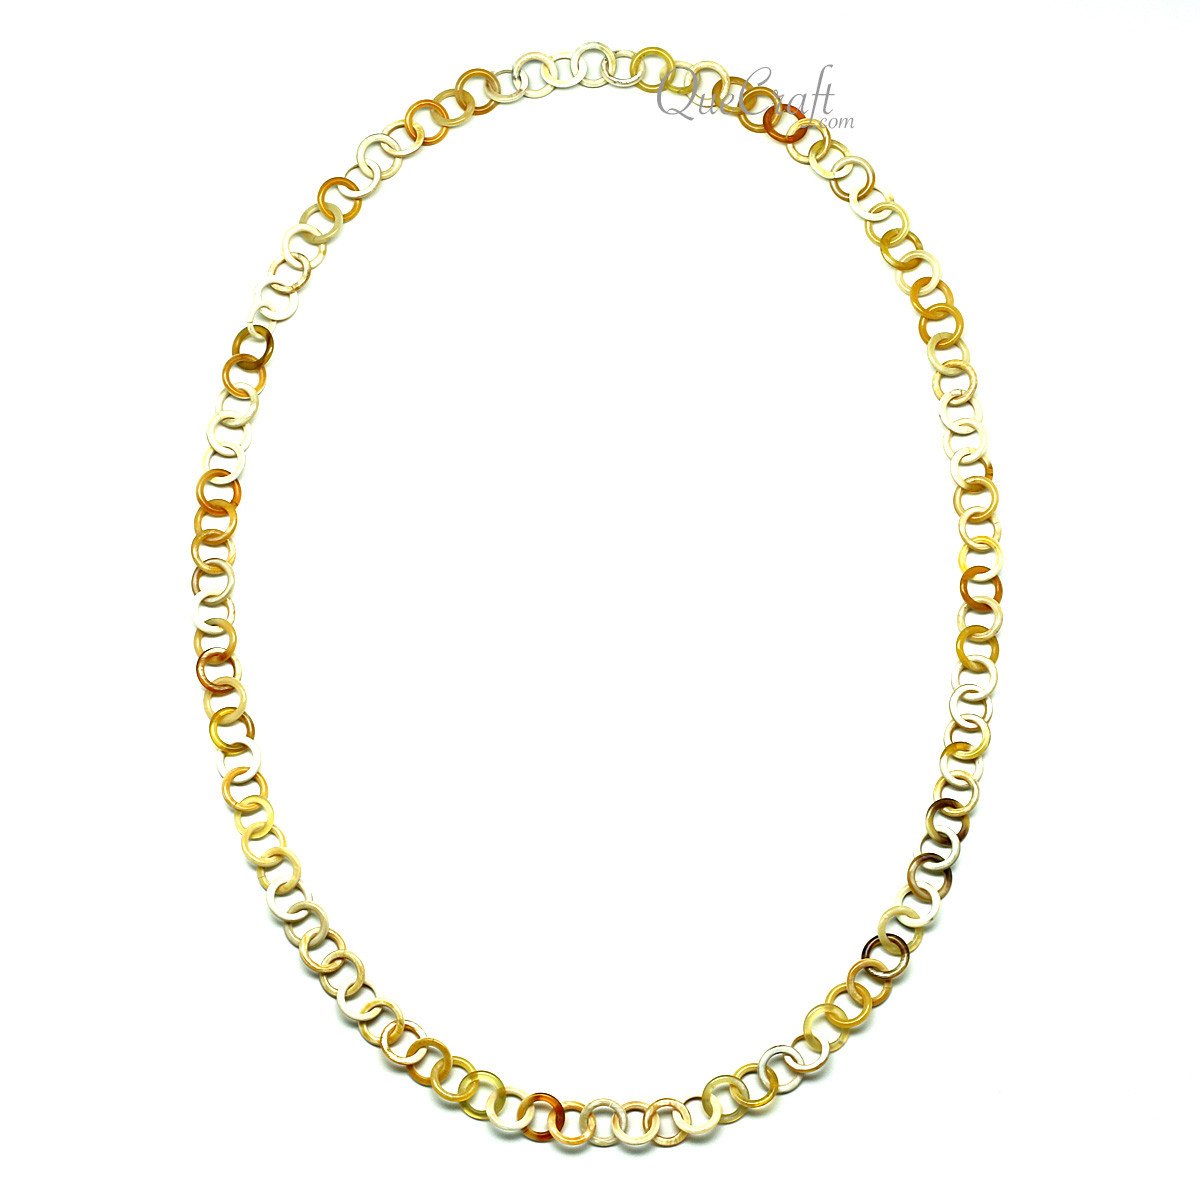 Horn Chain Necklace #11914 - HORN JEWELRY